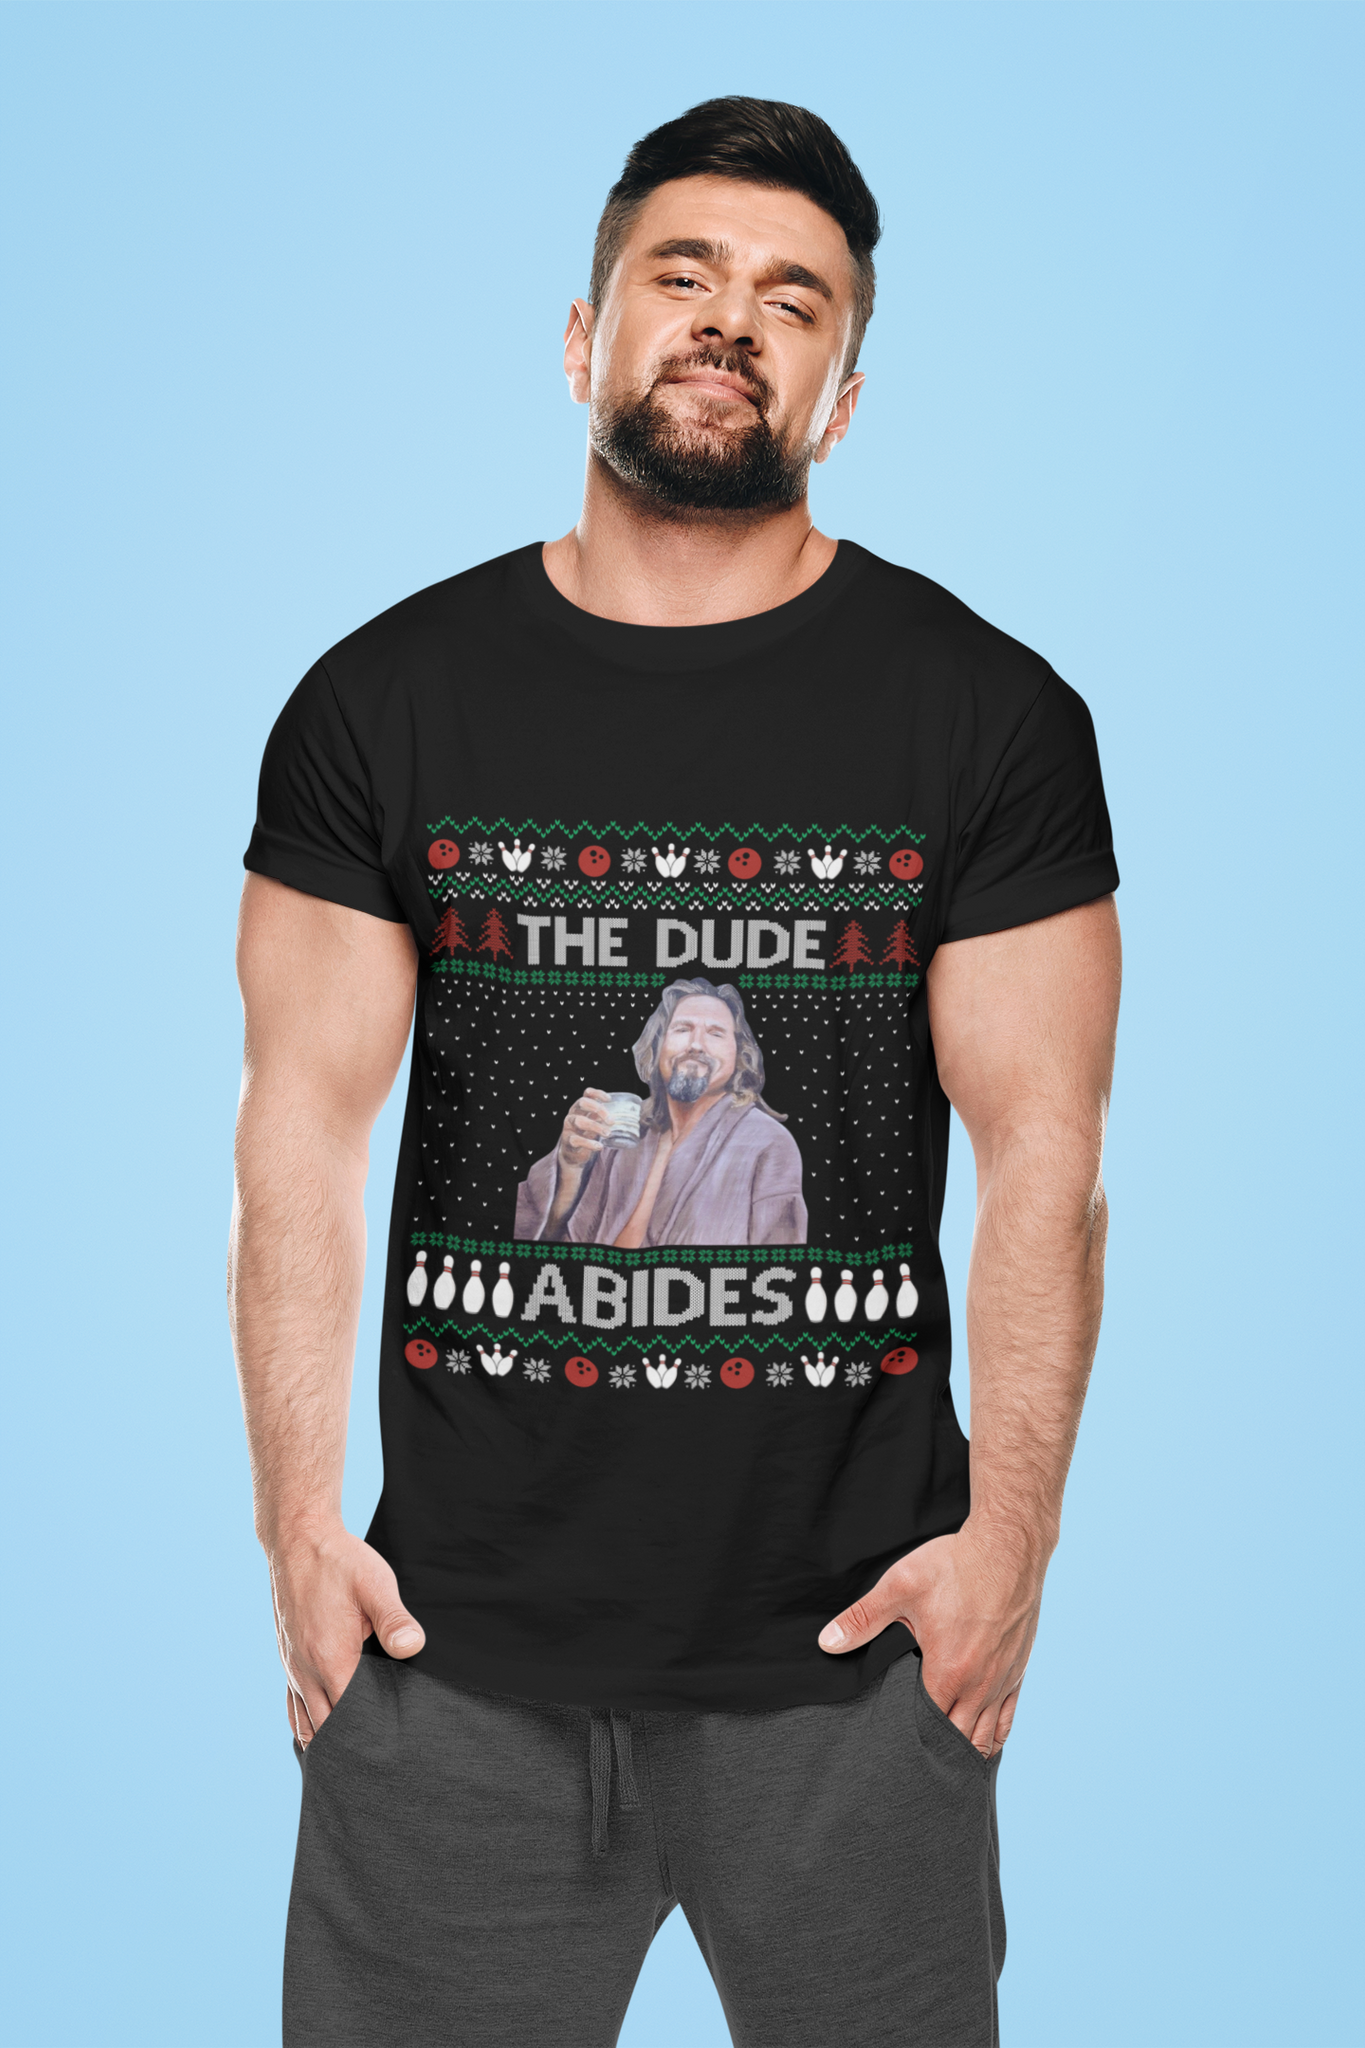 The Big Lebowski Ugly Sweater T Shirt, The Dude Abides Tshirt, The Dude T Shirt, Christmas Gifts